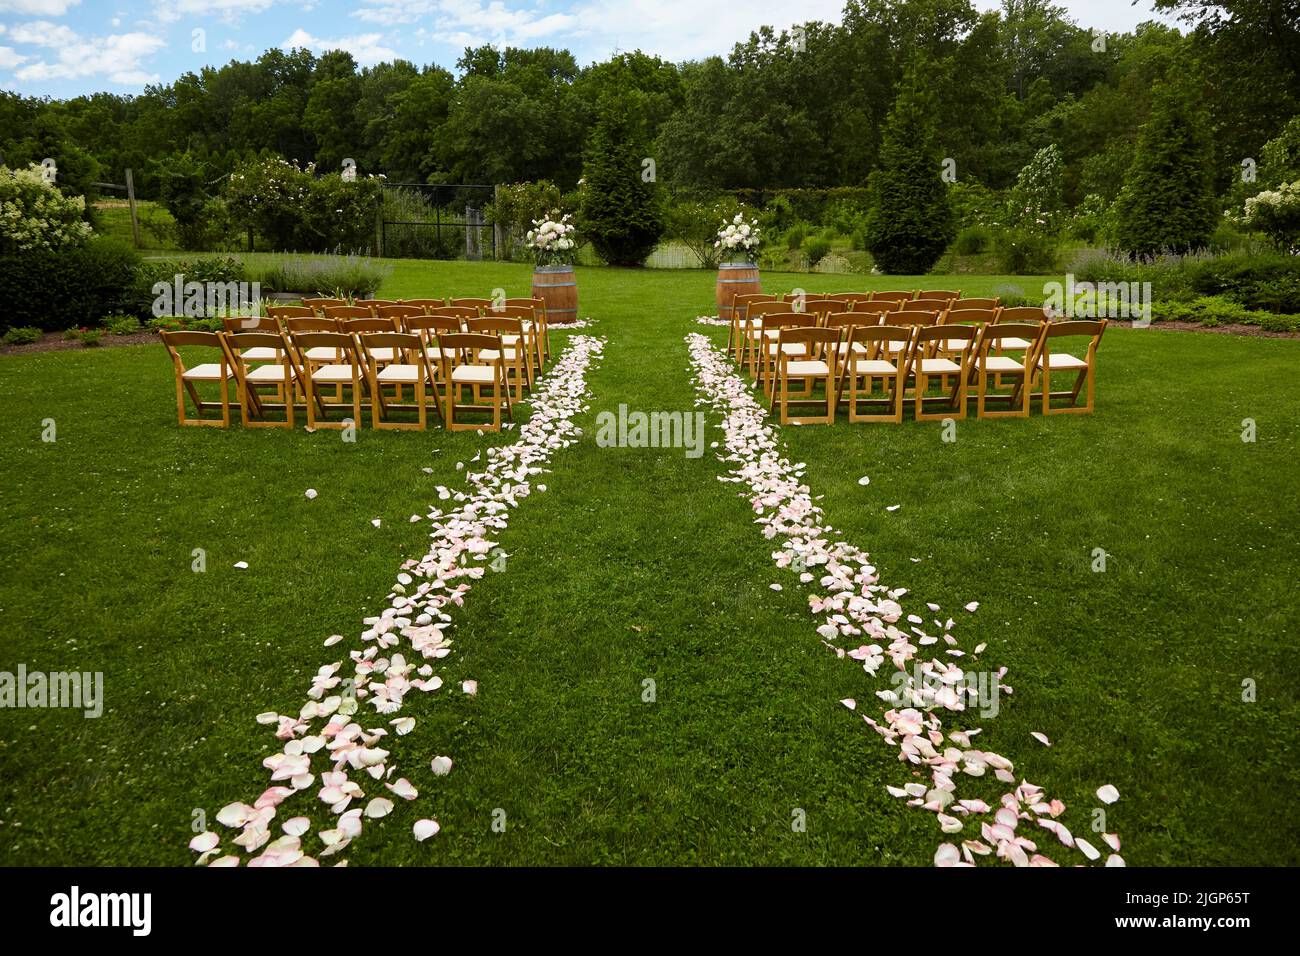 Empty guest chairs at an outdoor wedding on the grass with trees in the background. Stock Photo